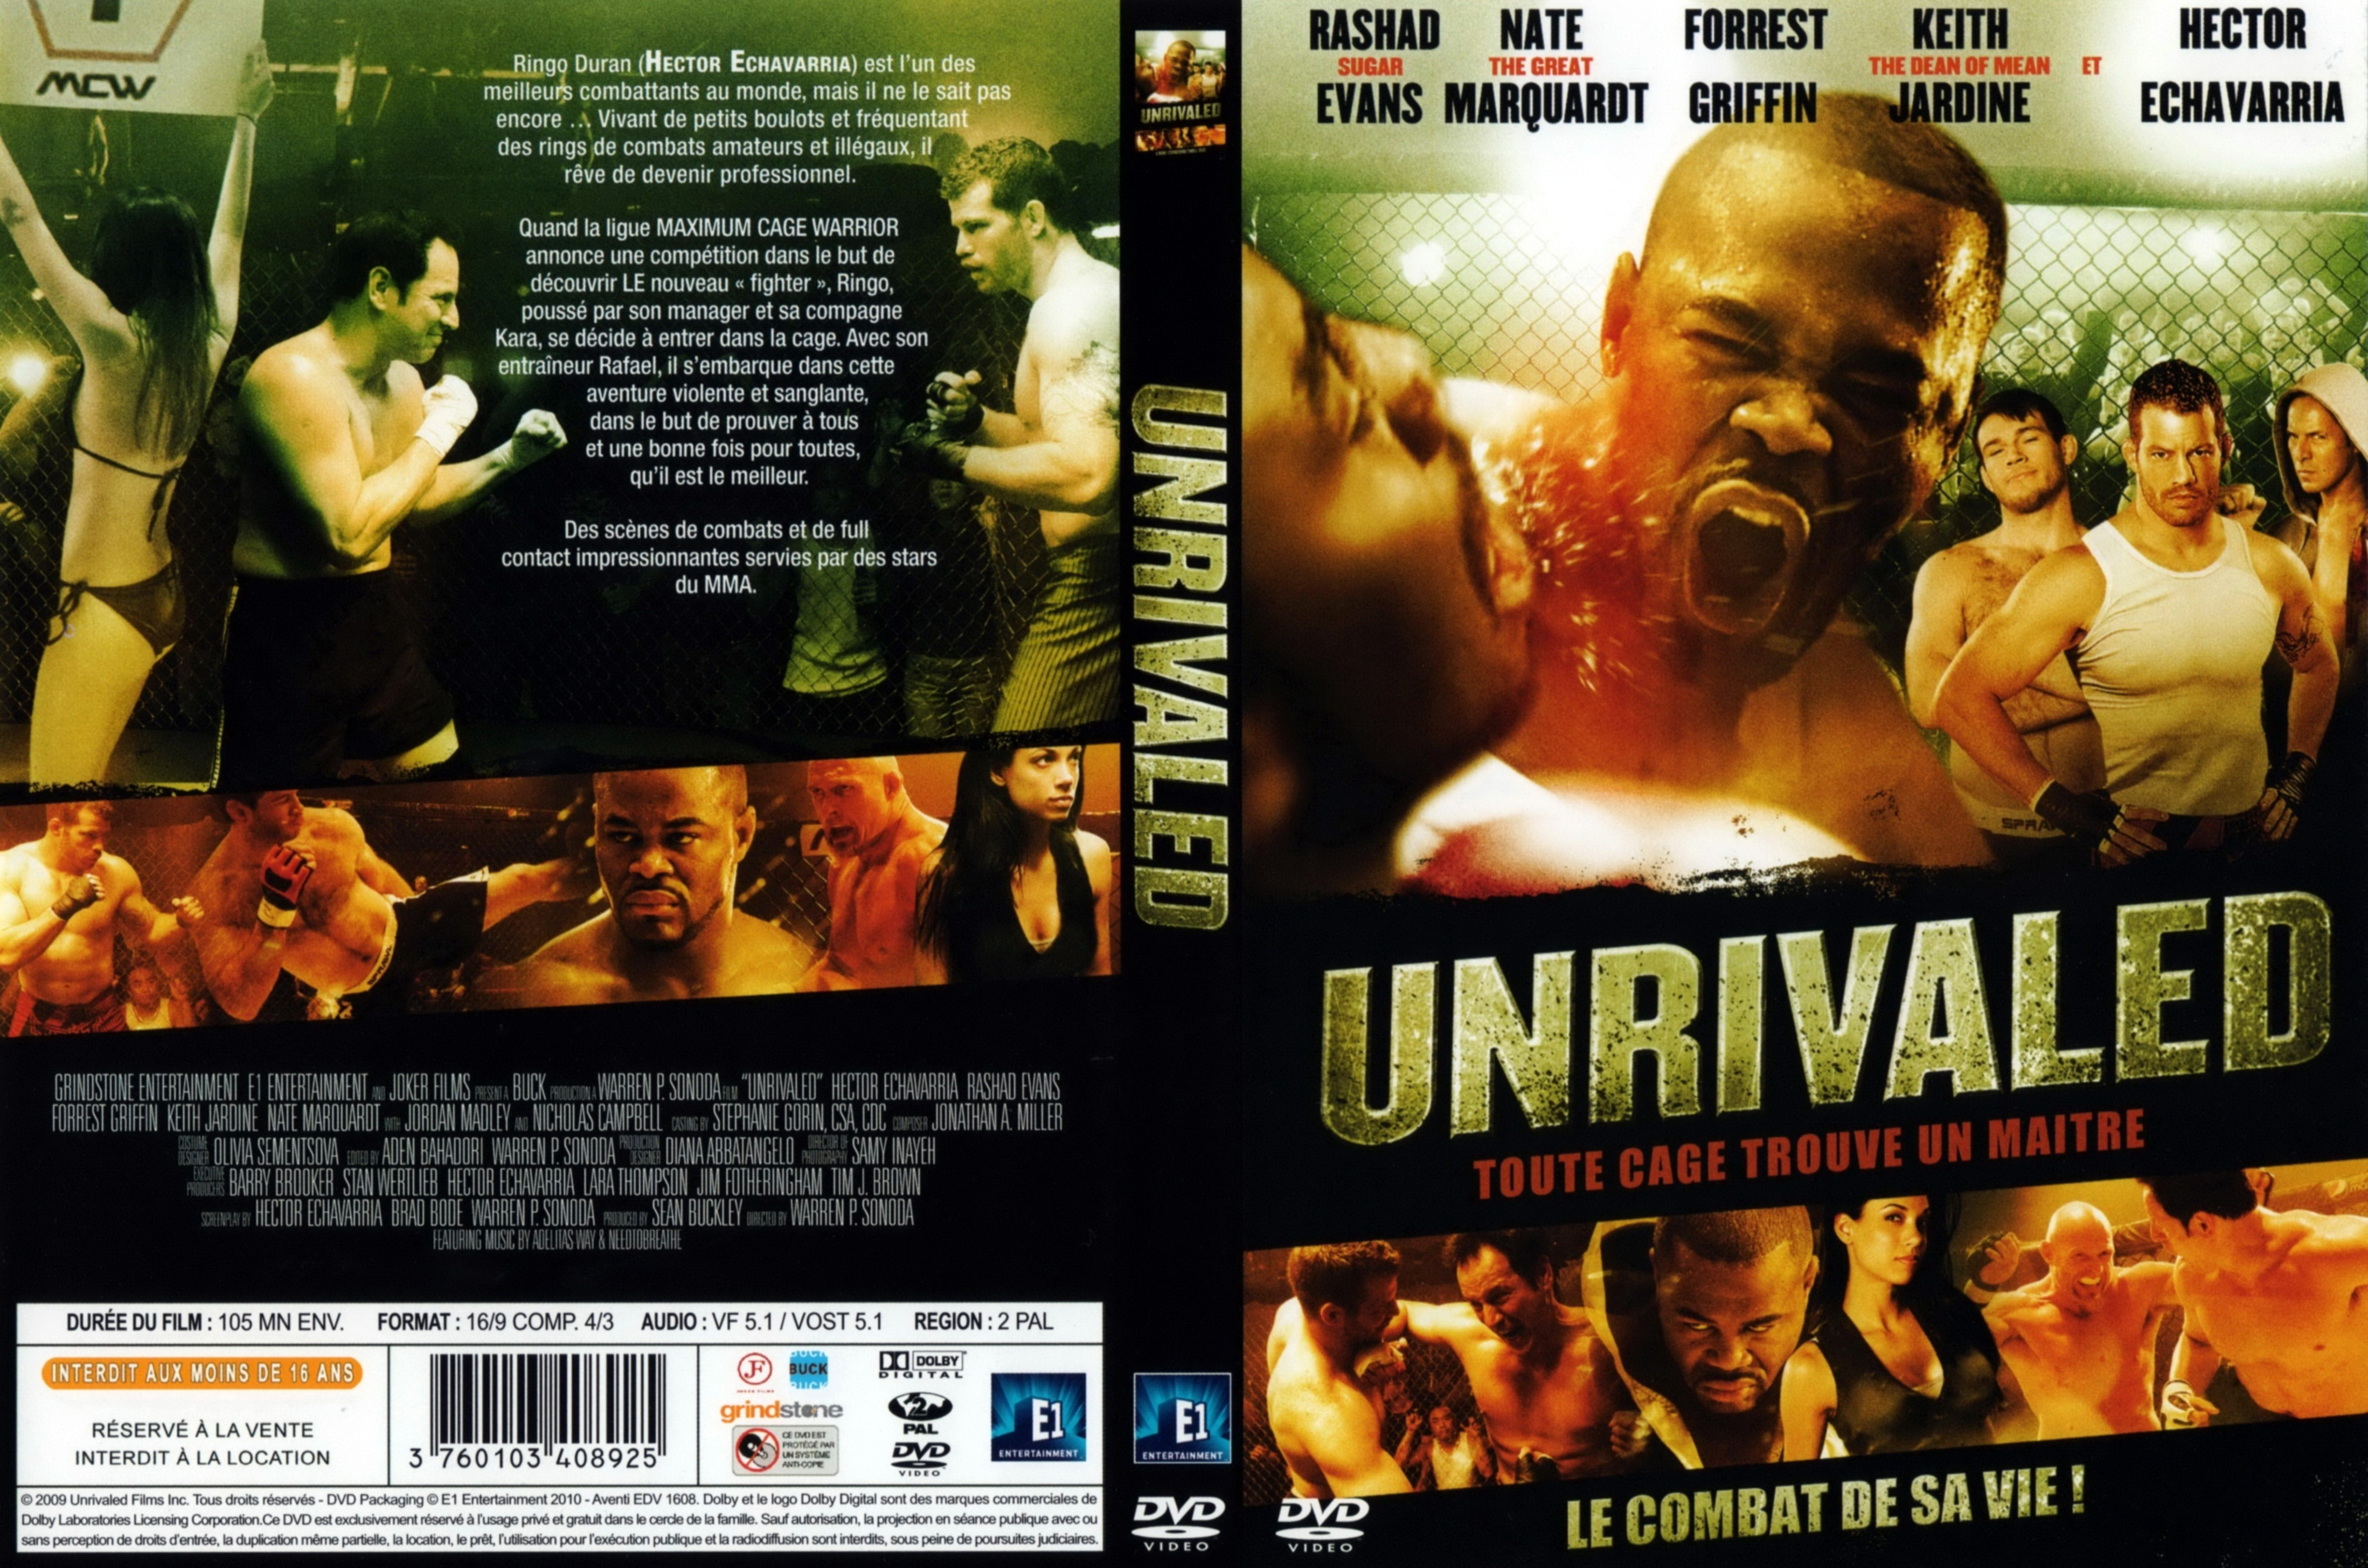 Jaquette DVD Unrivaled